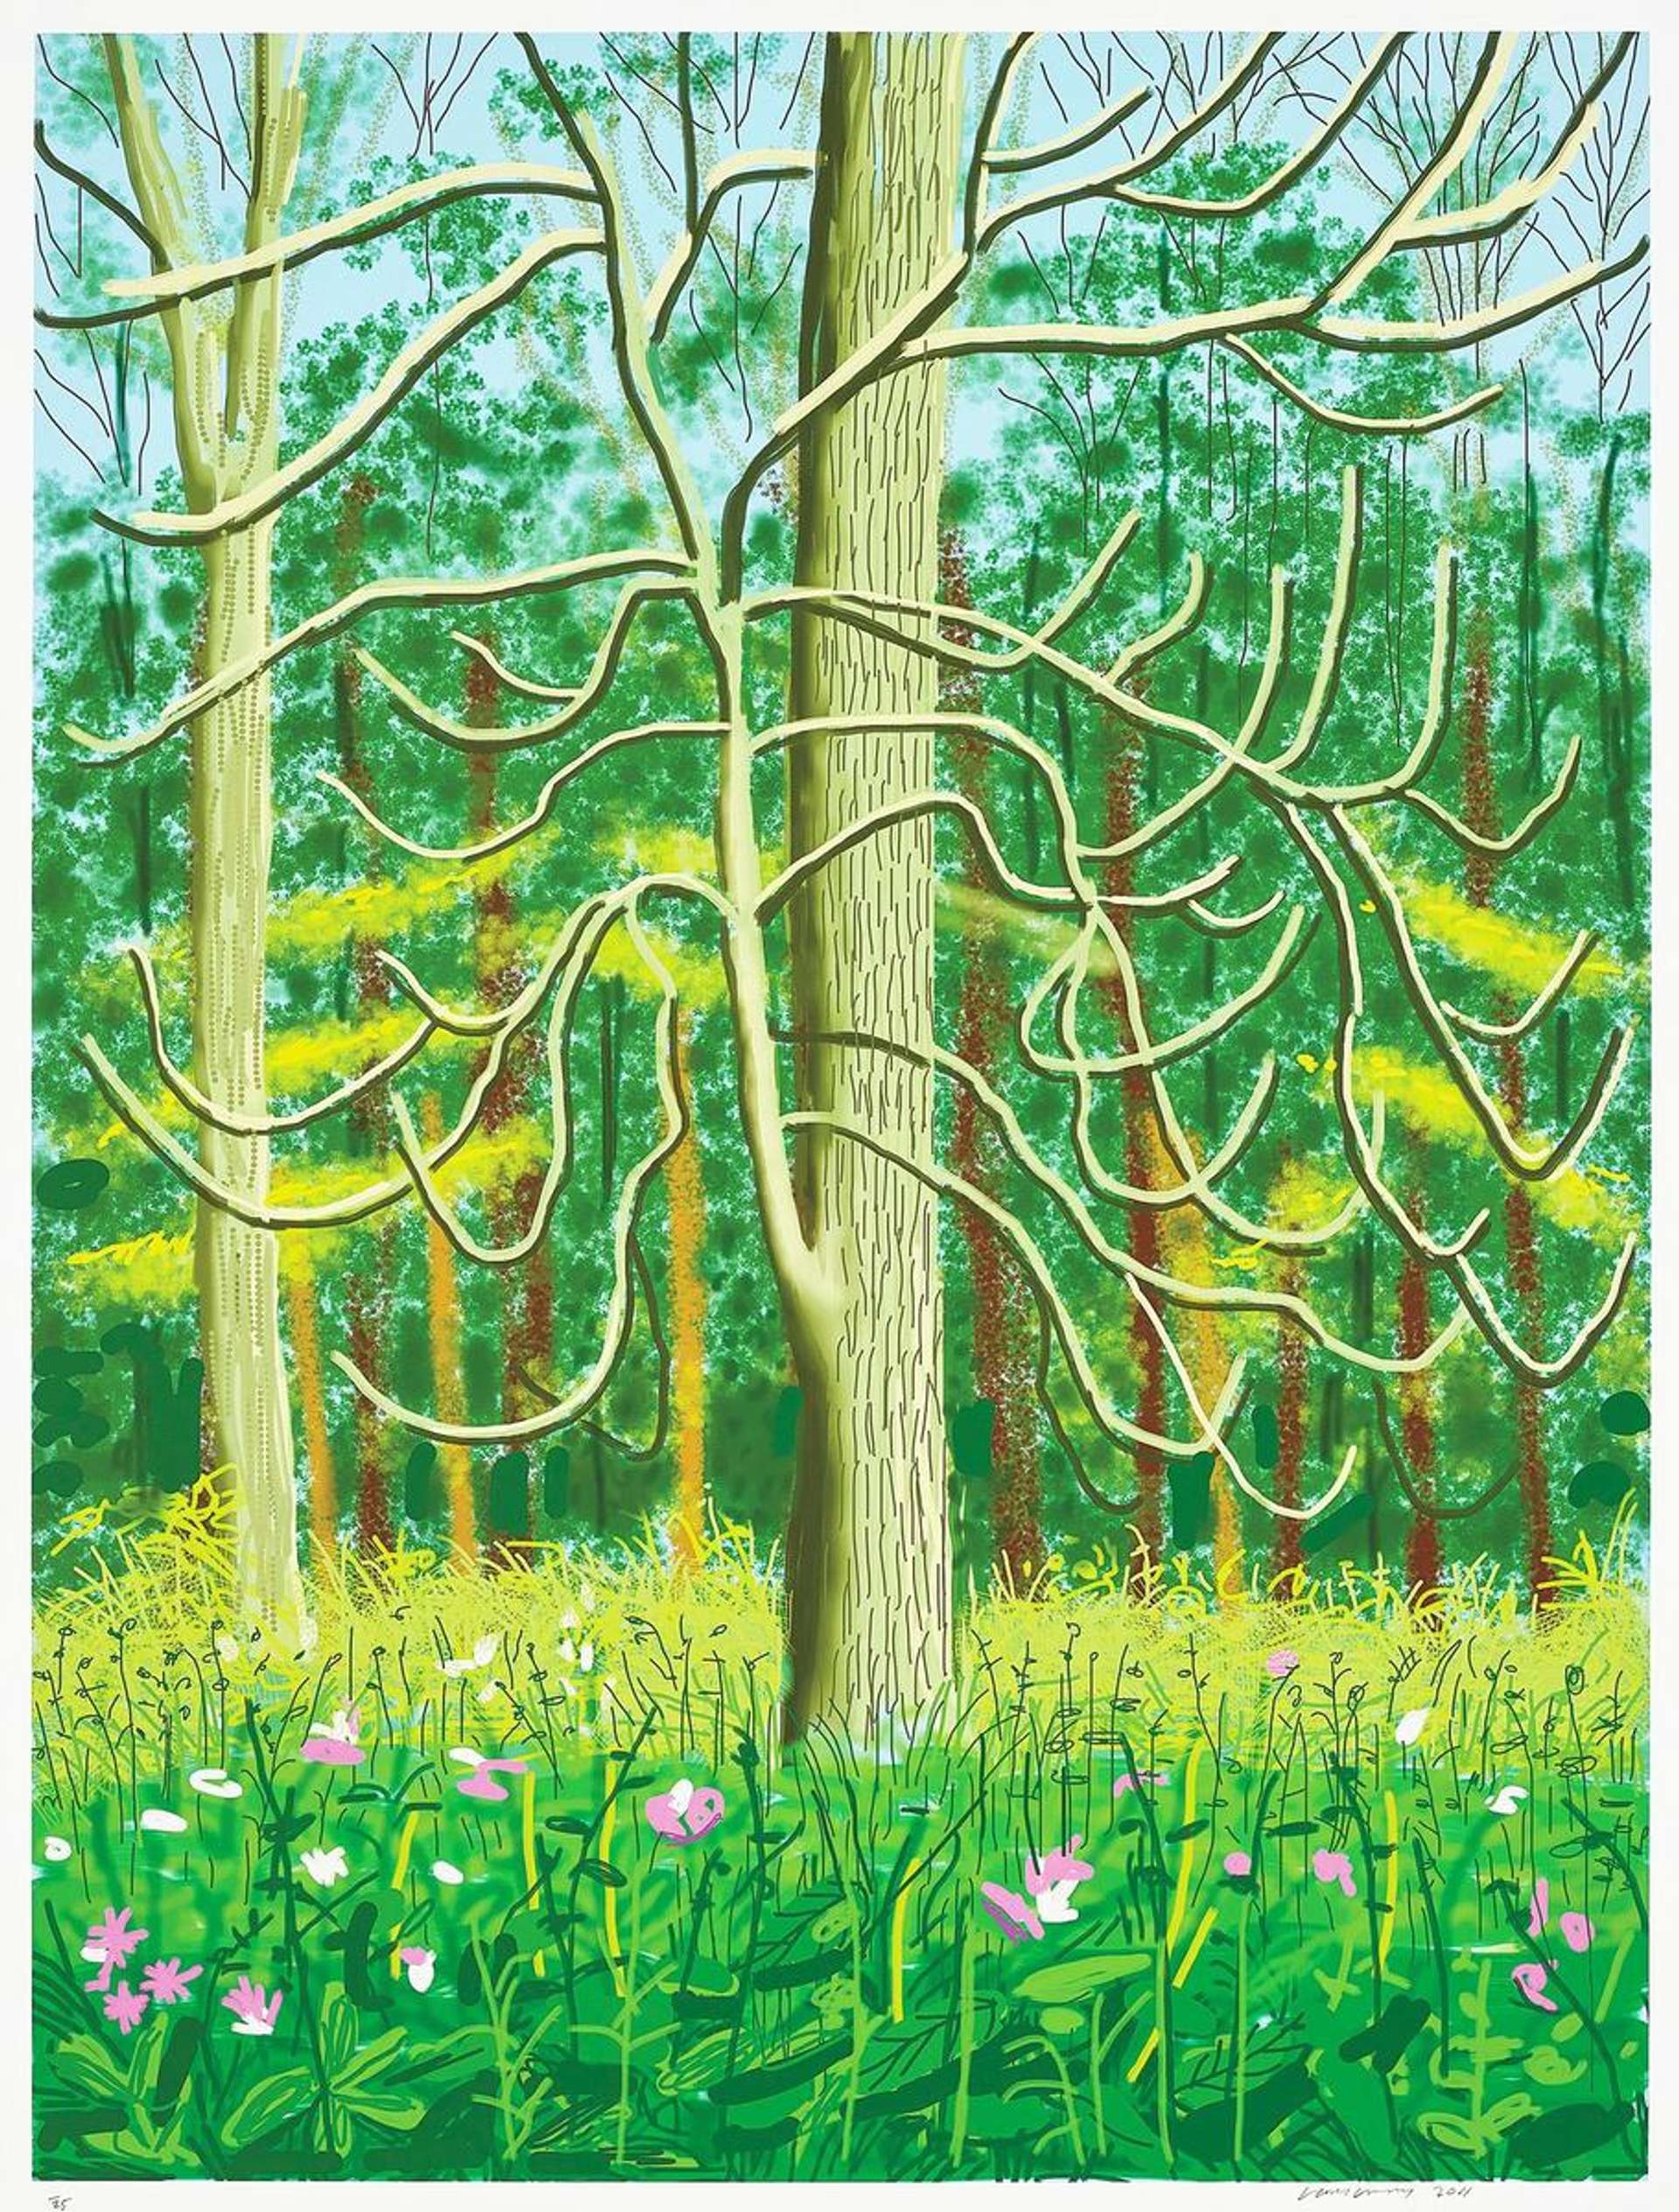 David Hockney: The Arrival Of Spring In Woldgate East Yorkshire 4th May 2011 - Signed Print